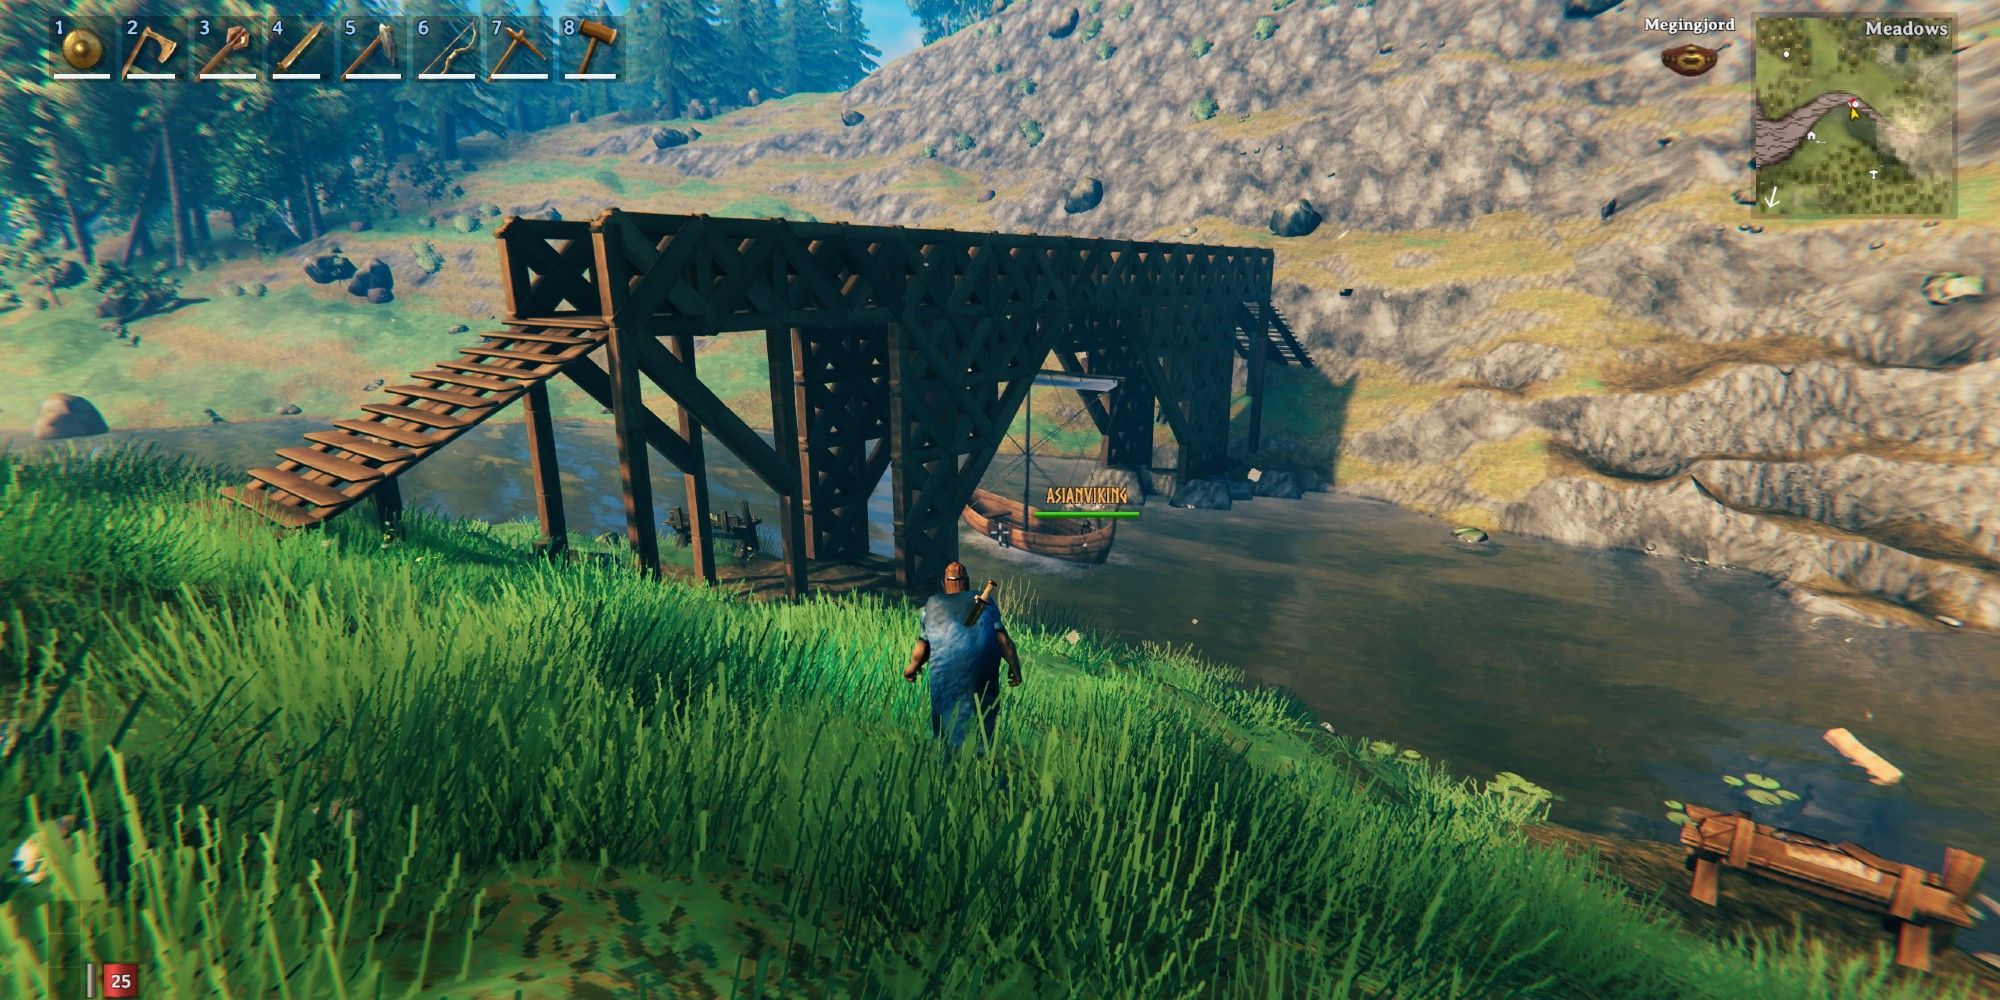 A player builds a bridge with an underpass for boats in Valheim